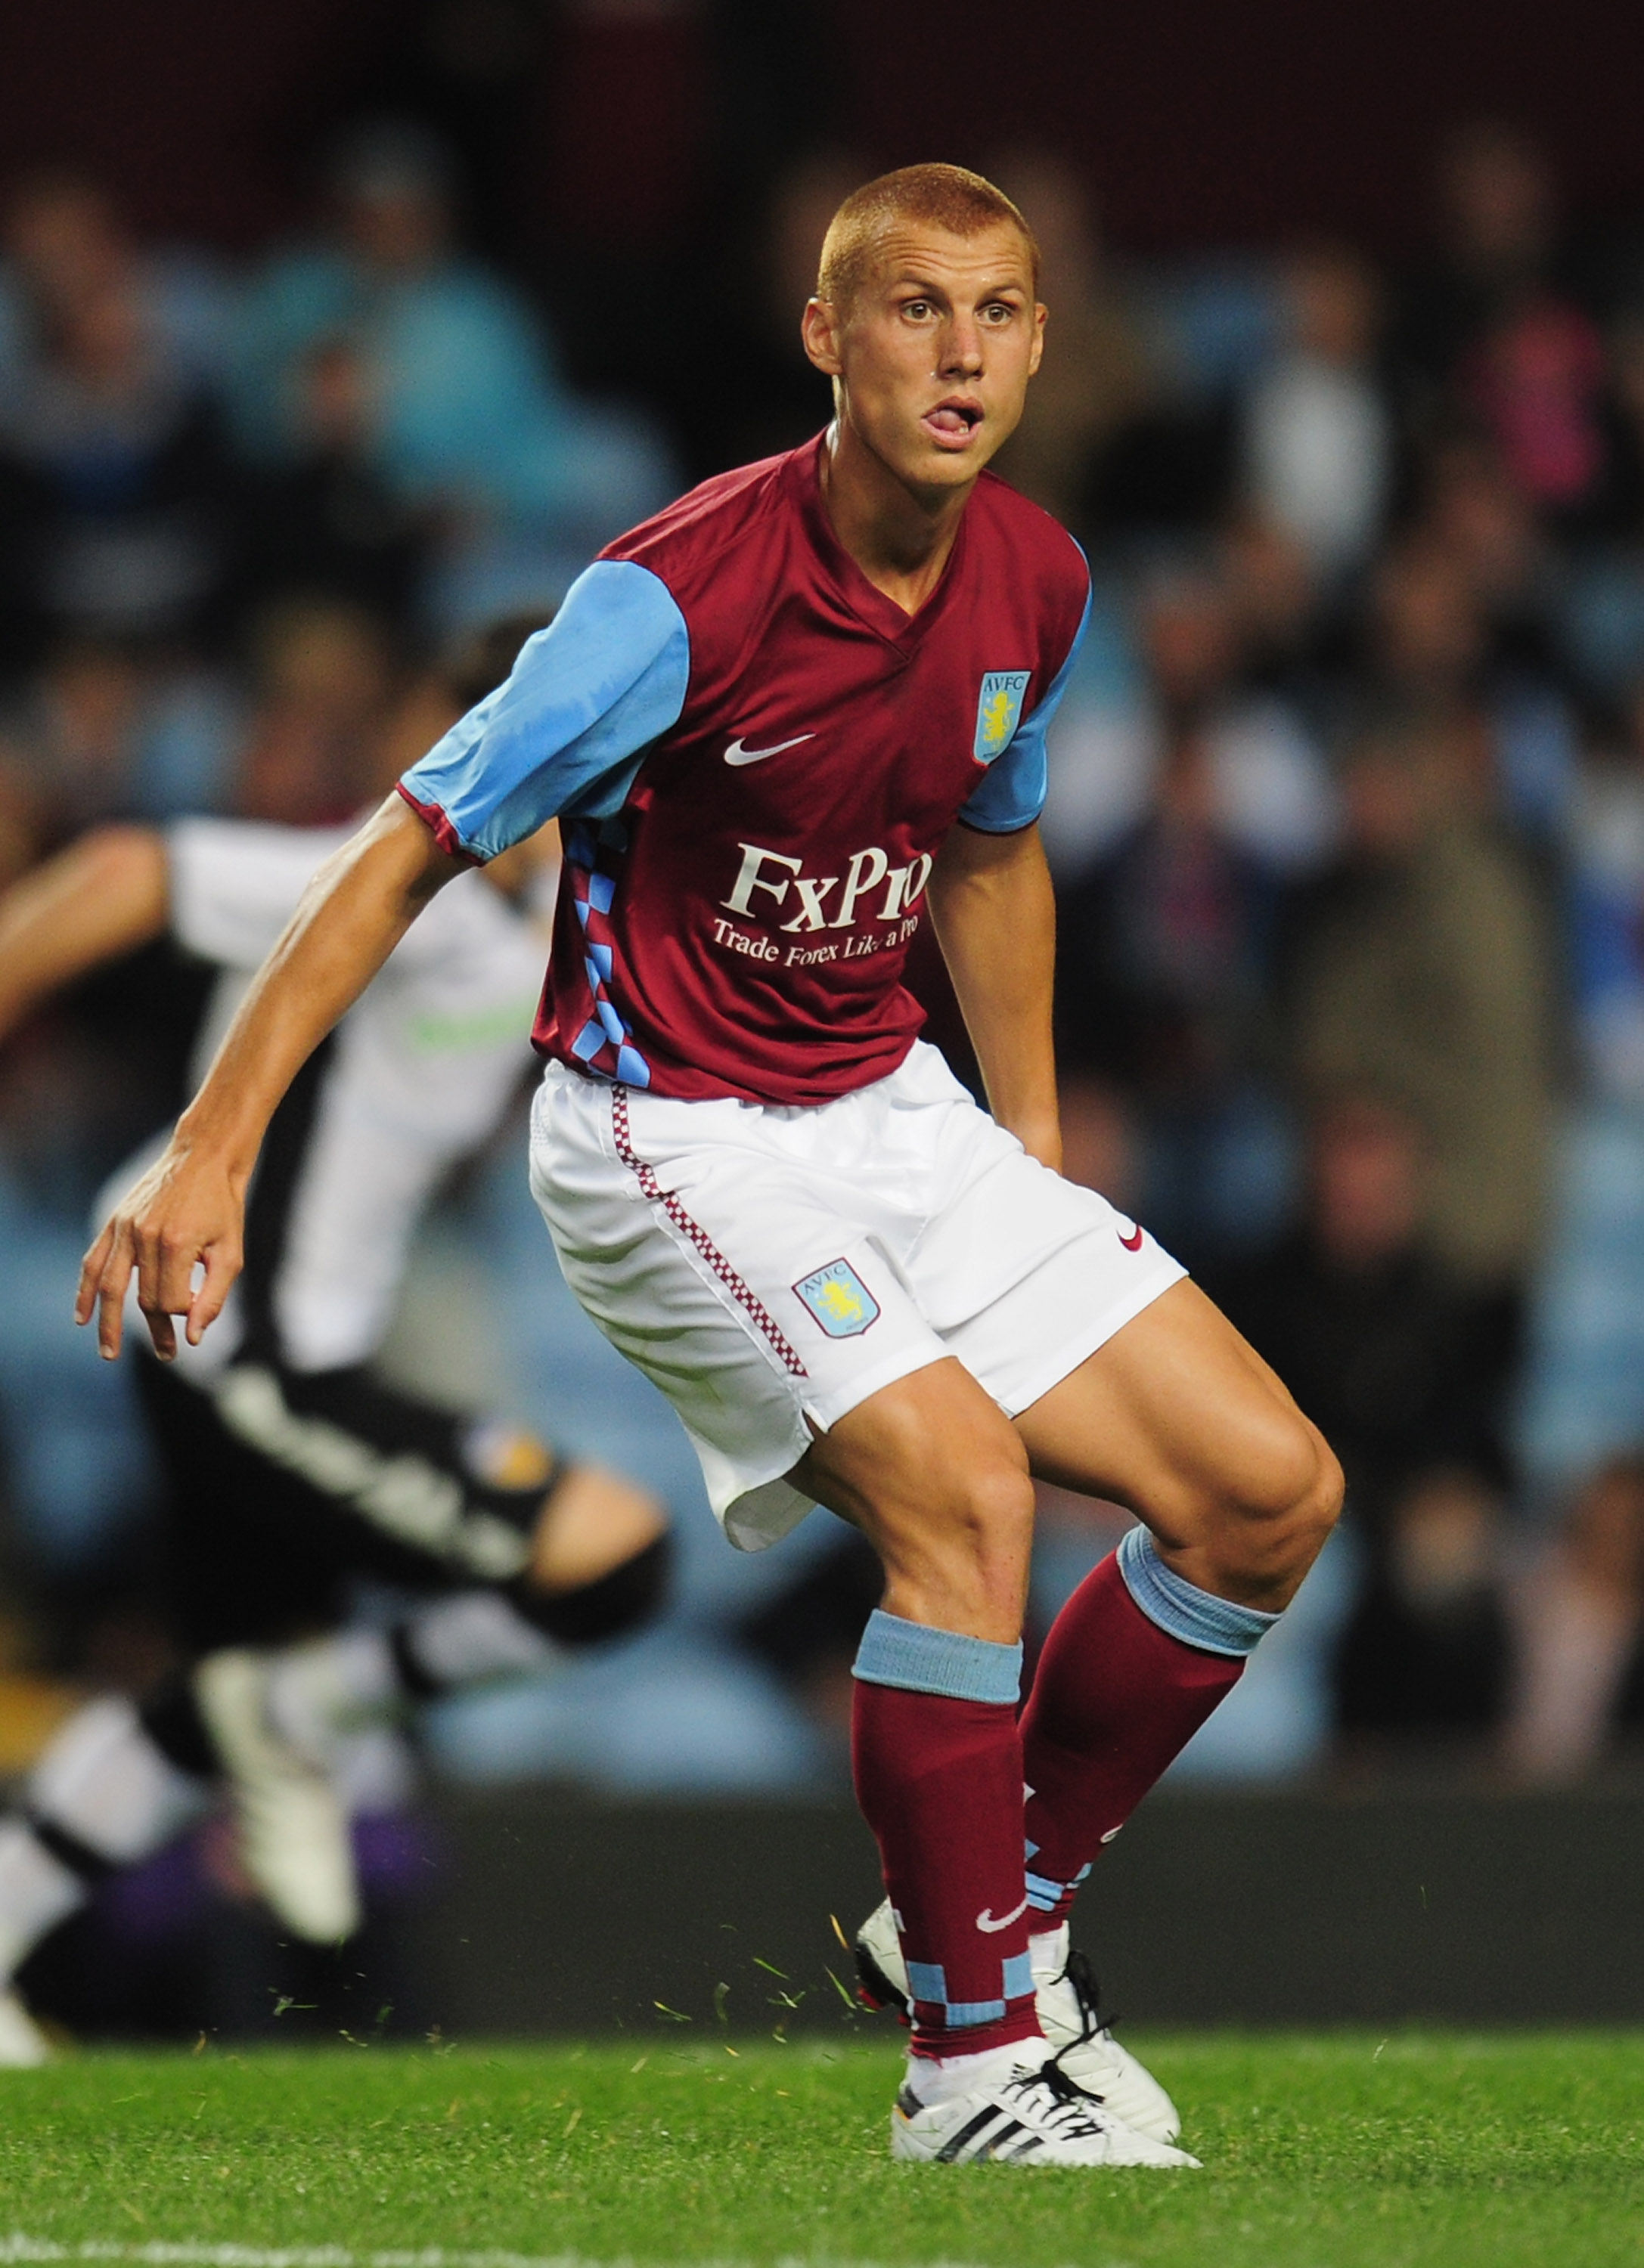 BIRMINGHAM, ENGLAND - AUGUST 06:  Steve Sidwell of Aston Villa in action during the friendly match between Aston Villa and Valencia at Villa Park on August 6, 2010 in Birmingham, England.  (Photo by Shaun Botterill/Getty Images)